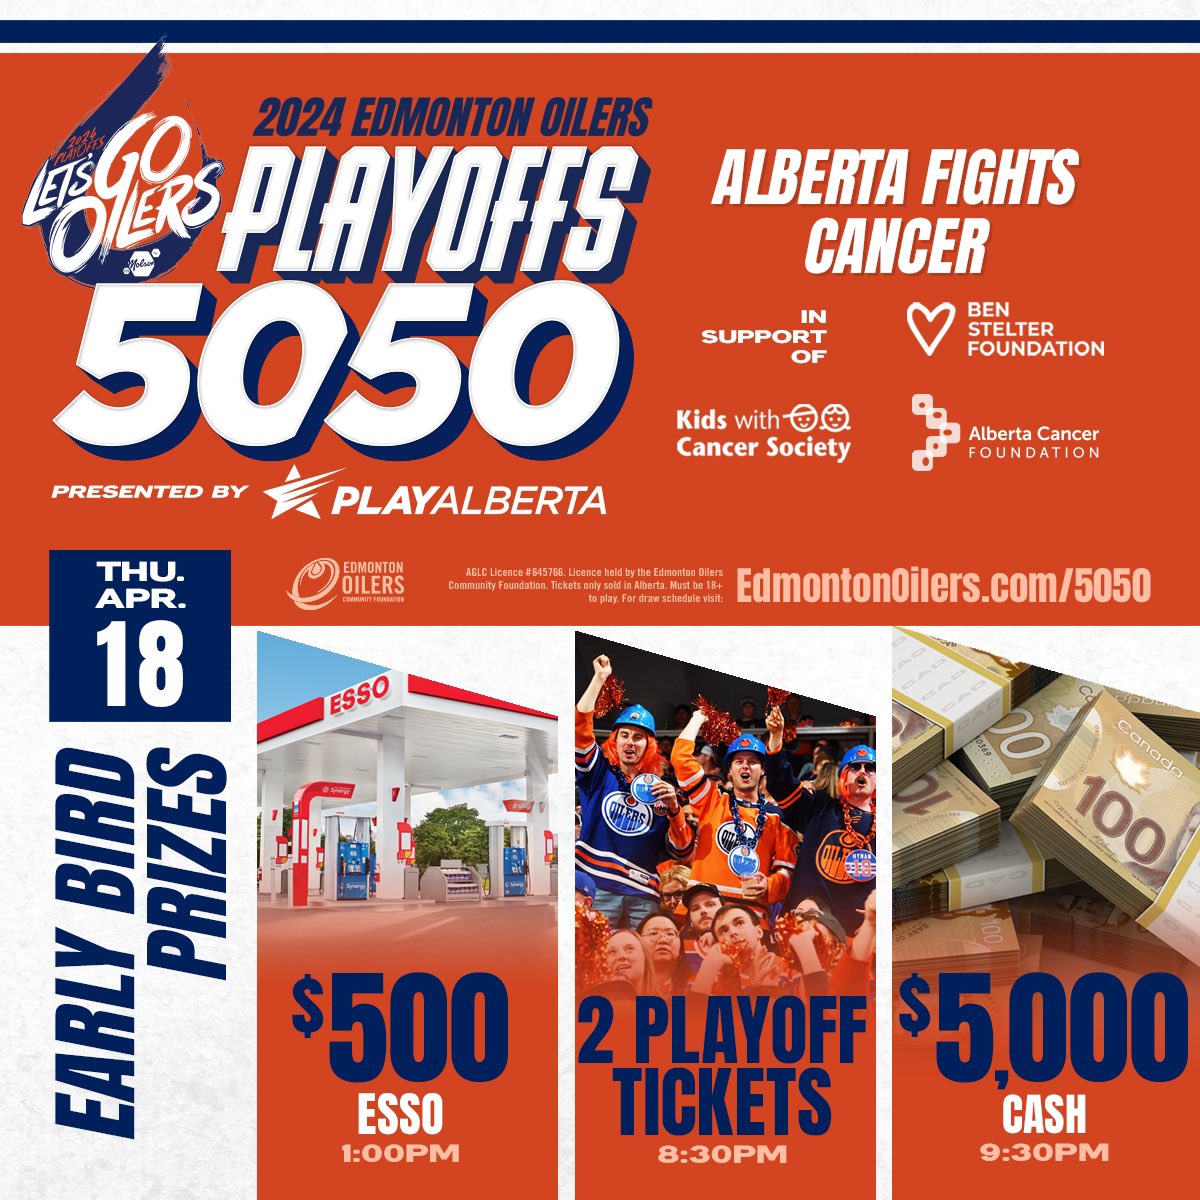 It’s game day!! Have you bought your @Oil_Foundation @EdmontonOilers 50/50 tickets yet? The jackpot is over $500k! Your tickets will help us buy Medical Equipment that isn’t covered by health benefits for children battling cancer. Buy your tickets at nhl.com/oilers/communi…